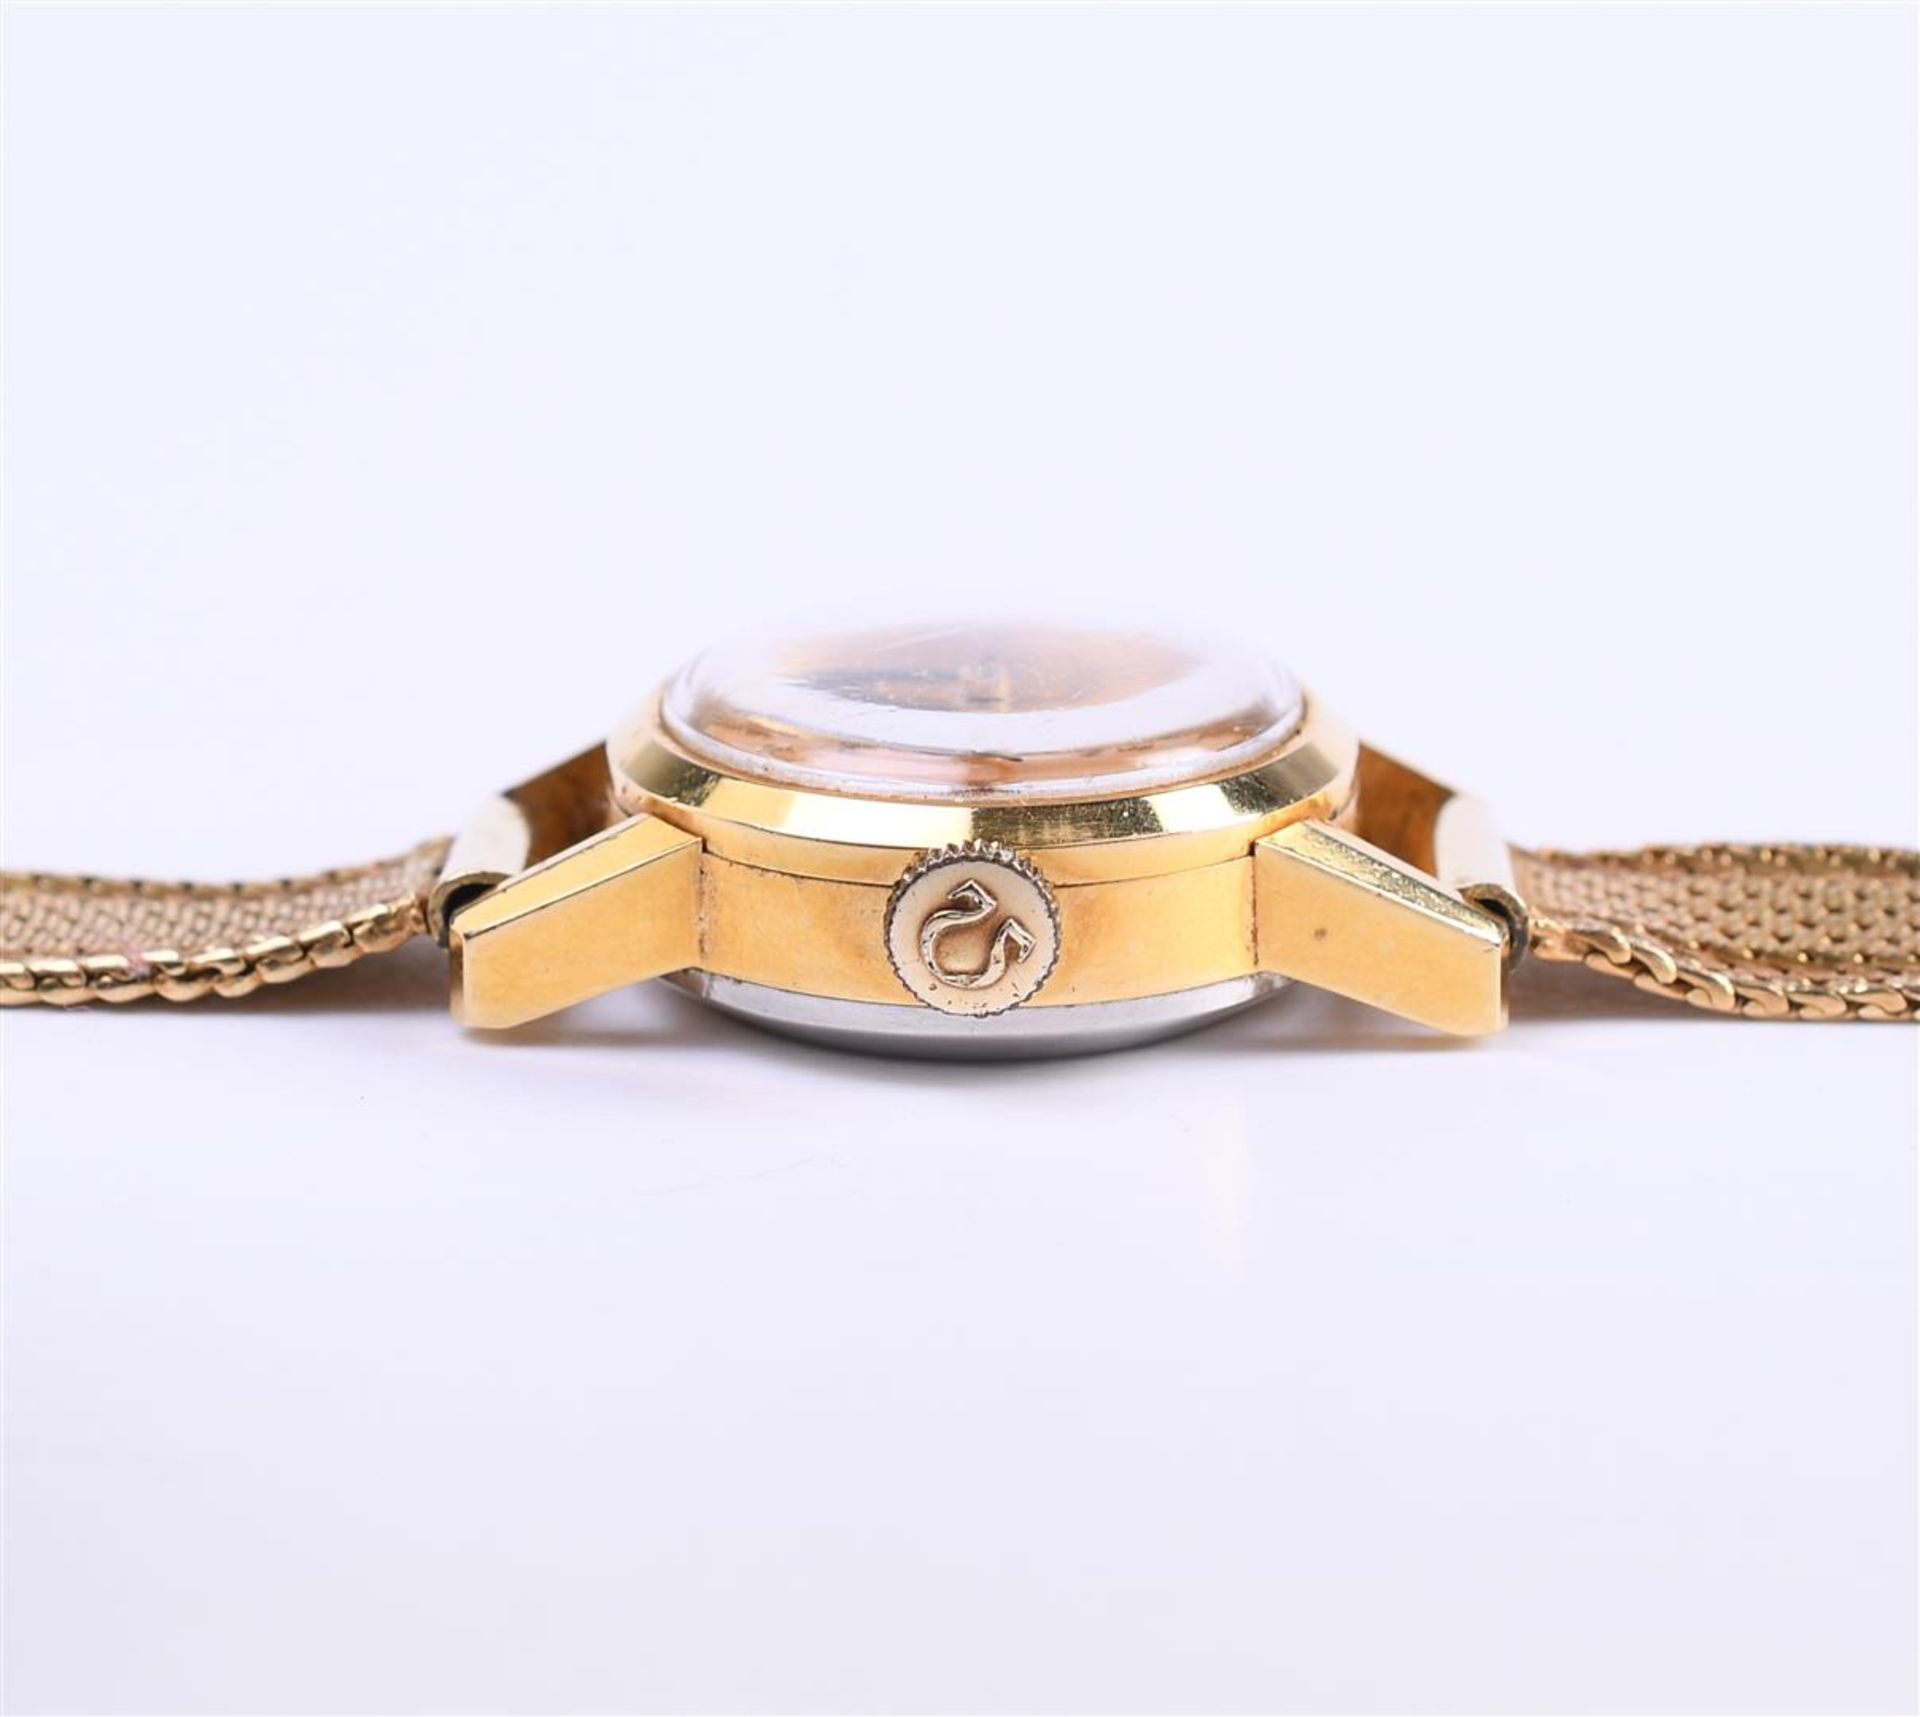 14 kt yellow gold Omega wind-up ladies watch with Milanese strap - Image 4 of 6